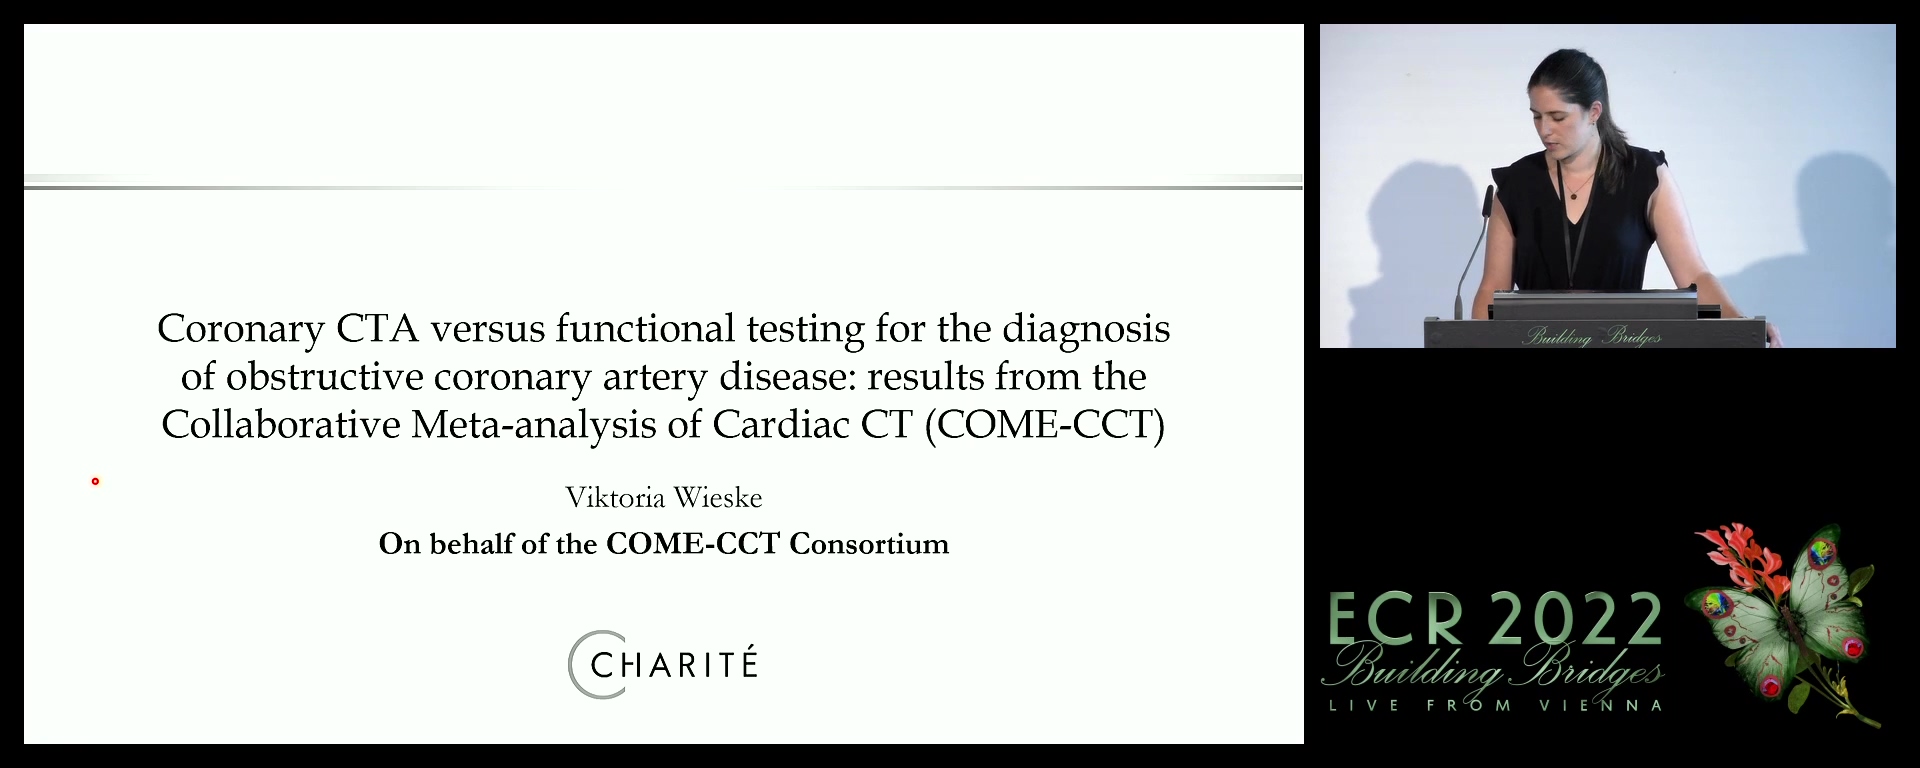 Coronary CTA versus functional testing for the diagnosis of obstructive coronary artery disease: results from the collaborative meta-analysis of Cardiac CT (COME-CCT) - Viktoria Wieske, Berlin / DE